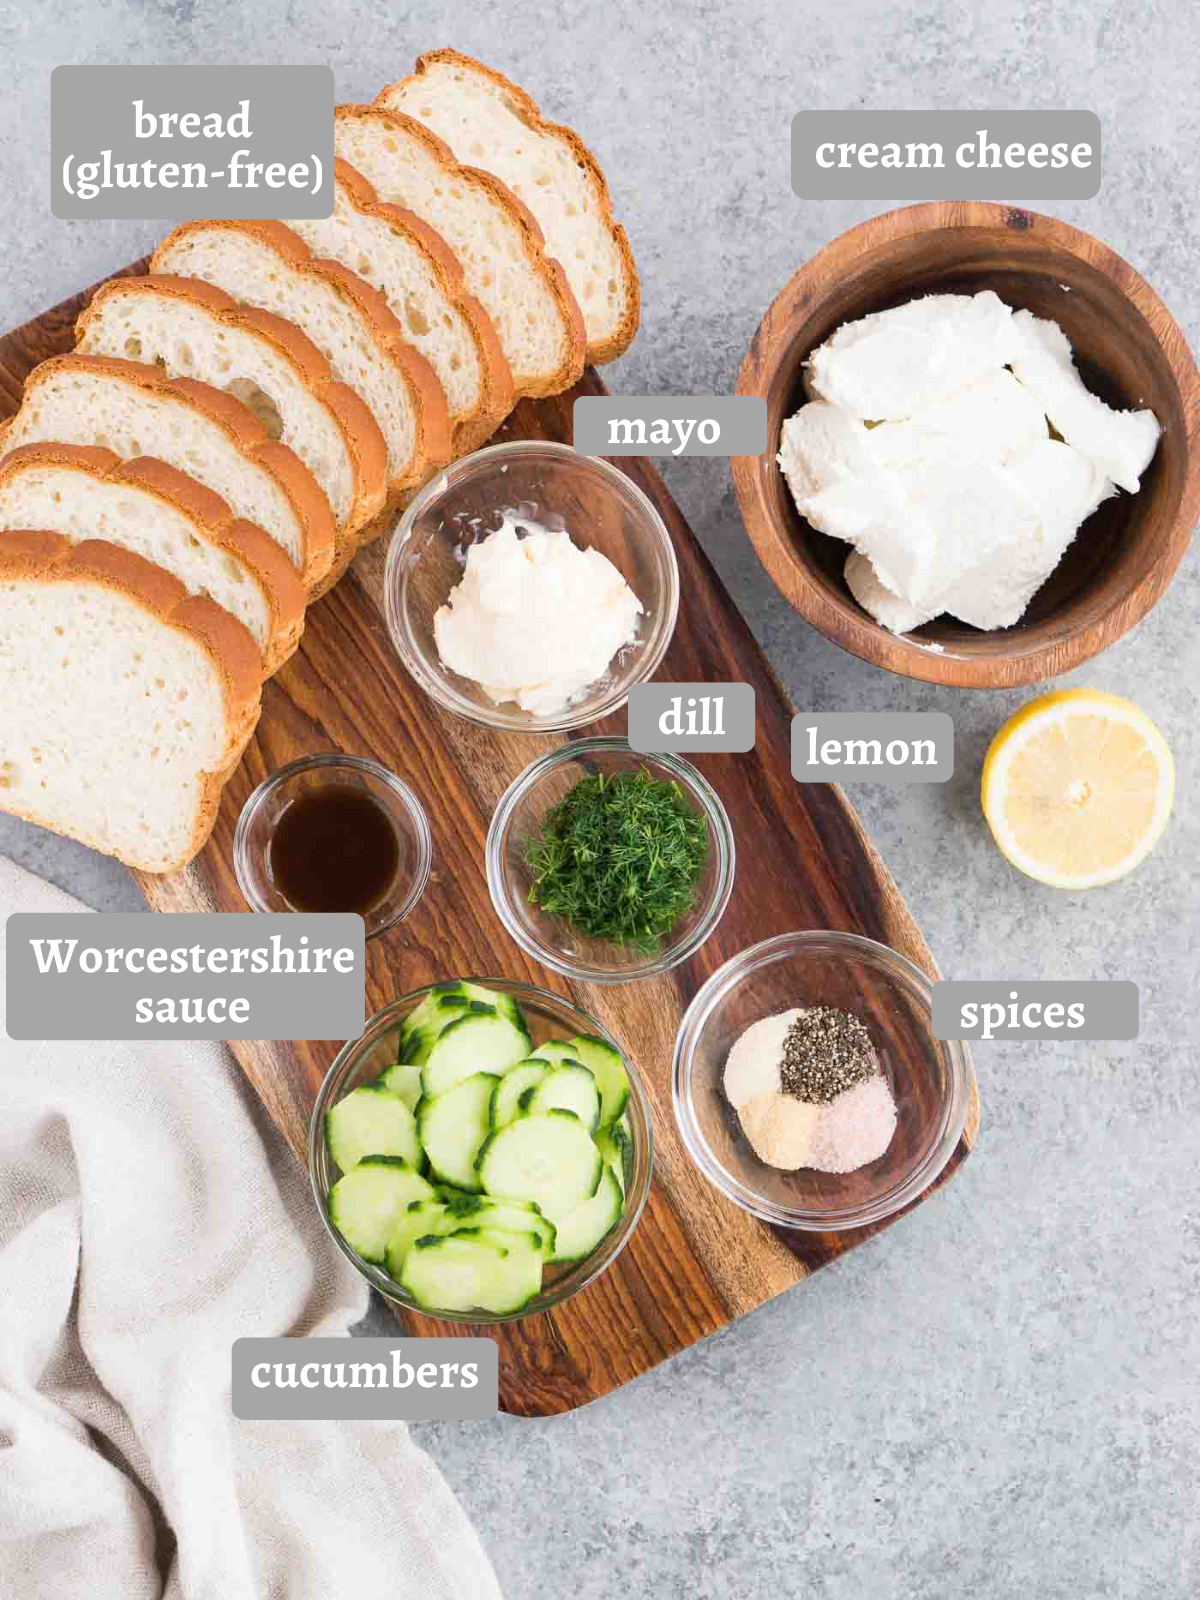 ingredients for cucumber sanwiches